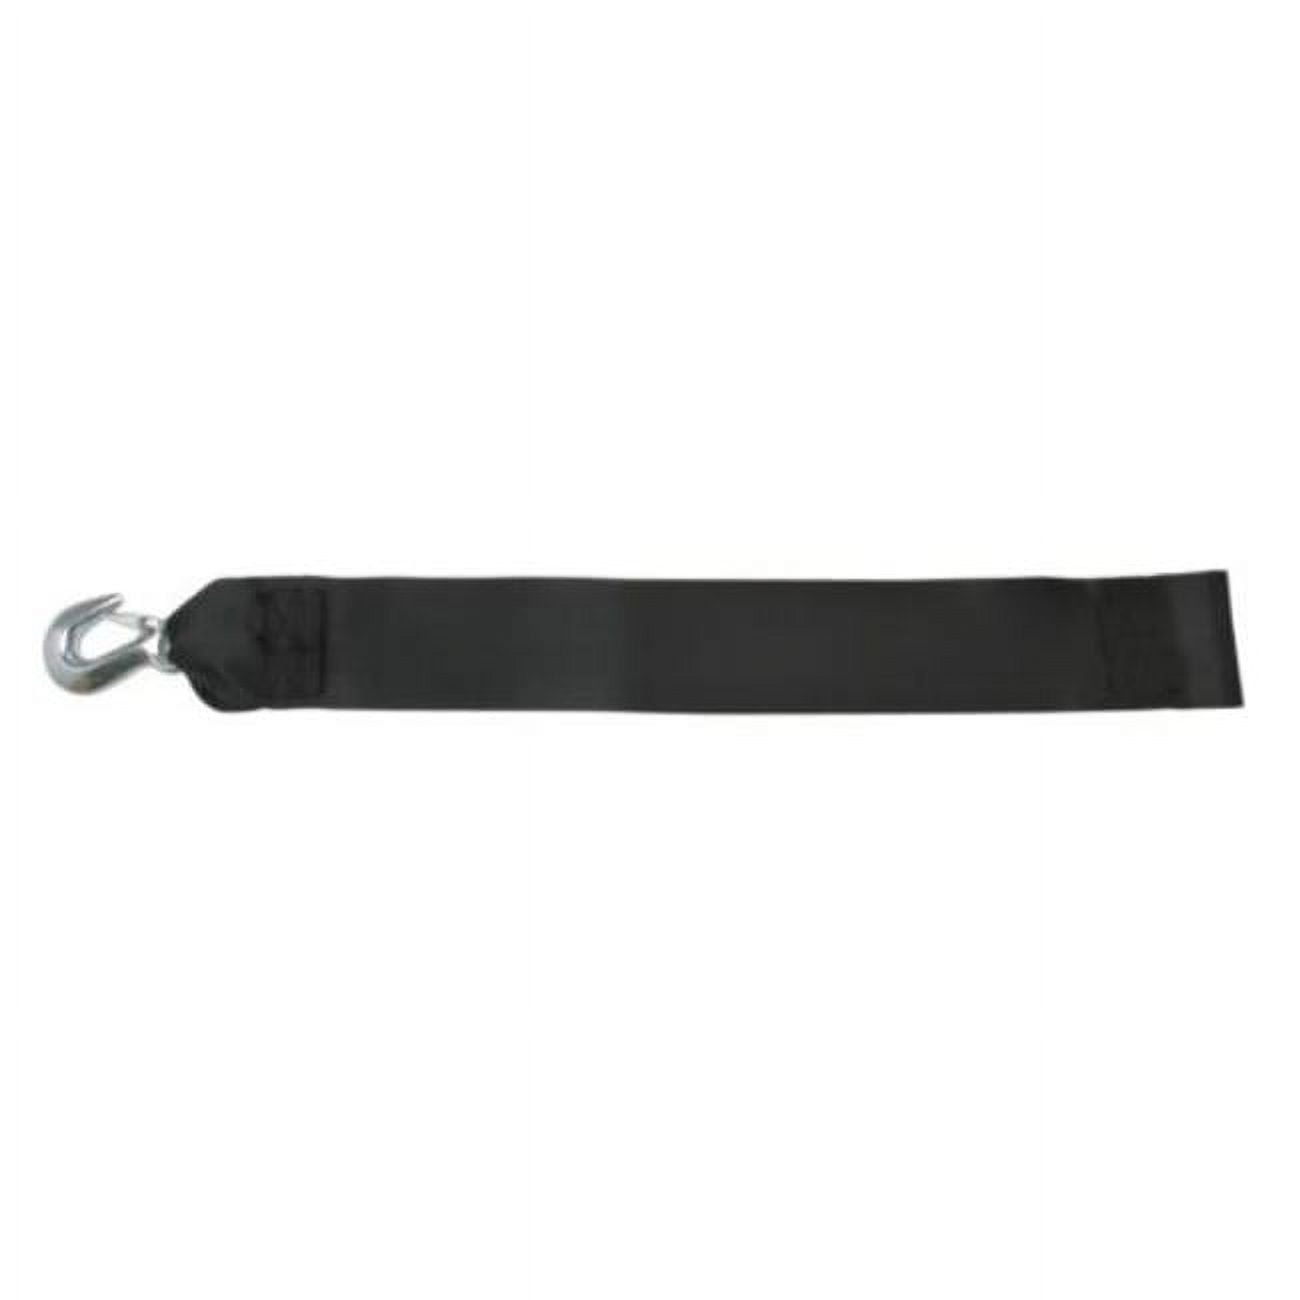 Immi F14213 3 in. x 25 ft. Winch Strap with Loop End - Walmart.com